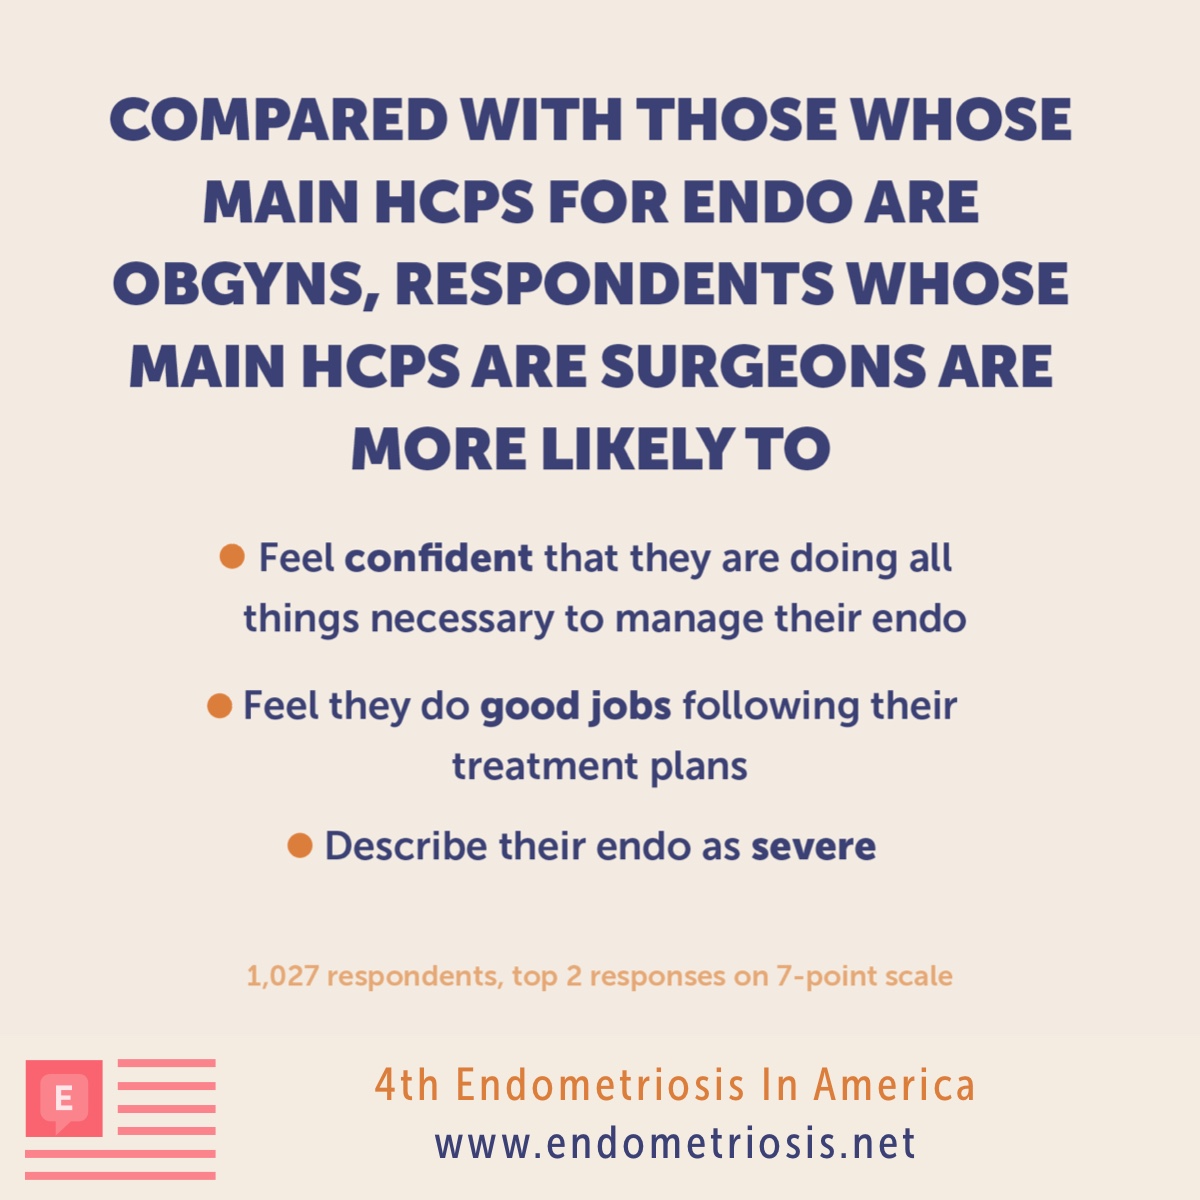 Compared to those whose main HCPs are OBGYNs, those whose main HCPs are surgeons are more likely to describe endo as severe.